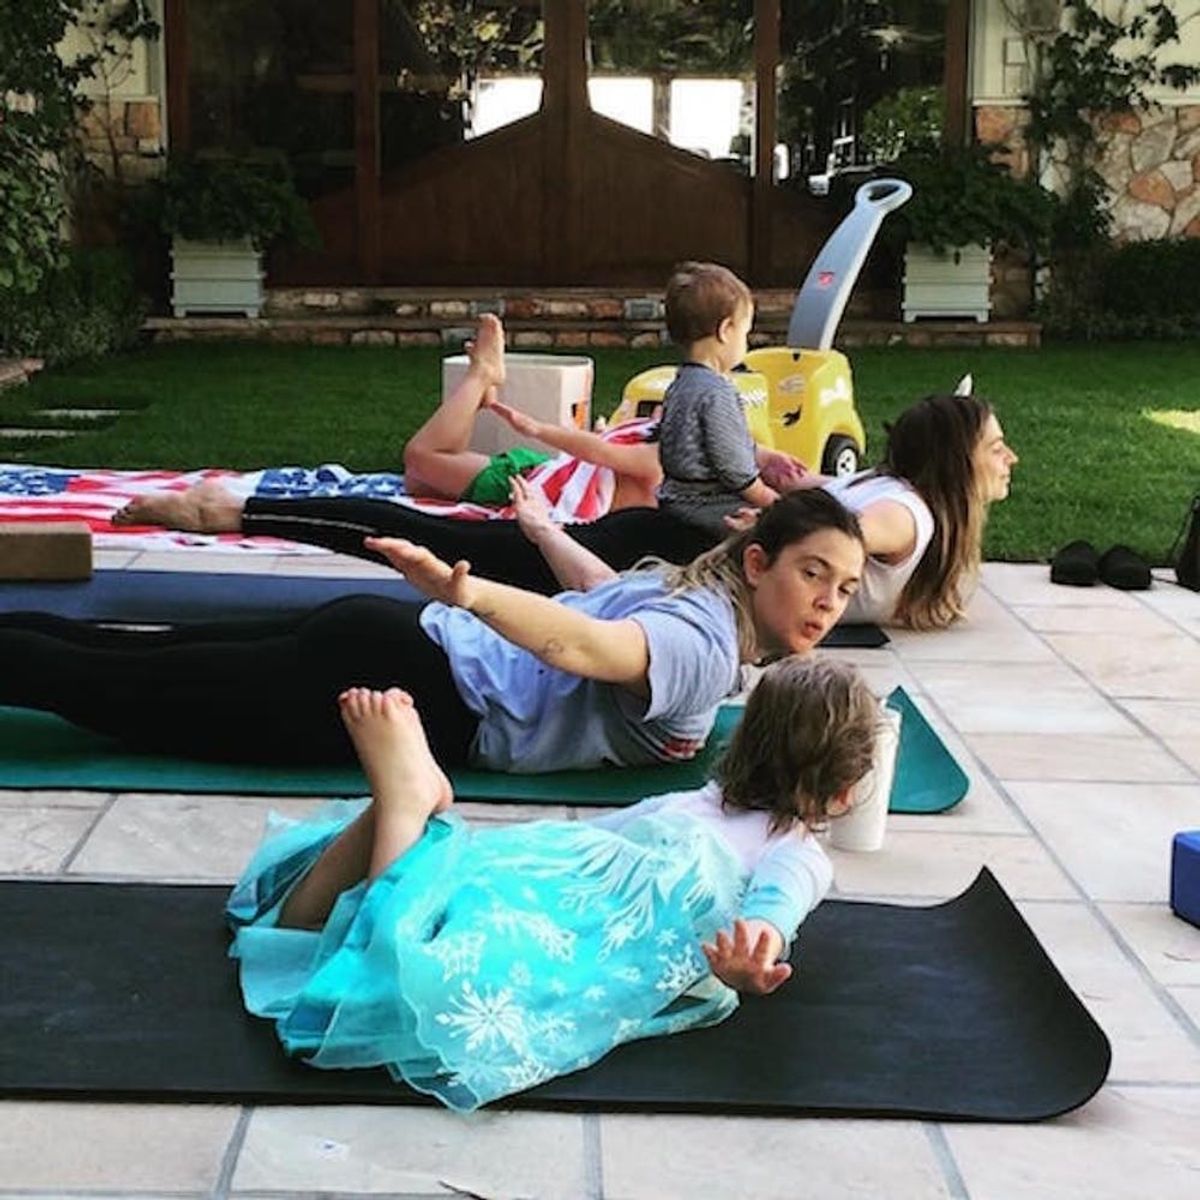 Morning Buzz! Drew Barrymore Doing Yoga With Her Daughter Is Picture-Perfect Mother-Daughter Bonding + More